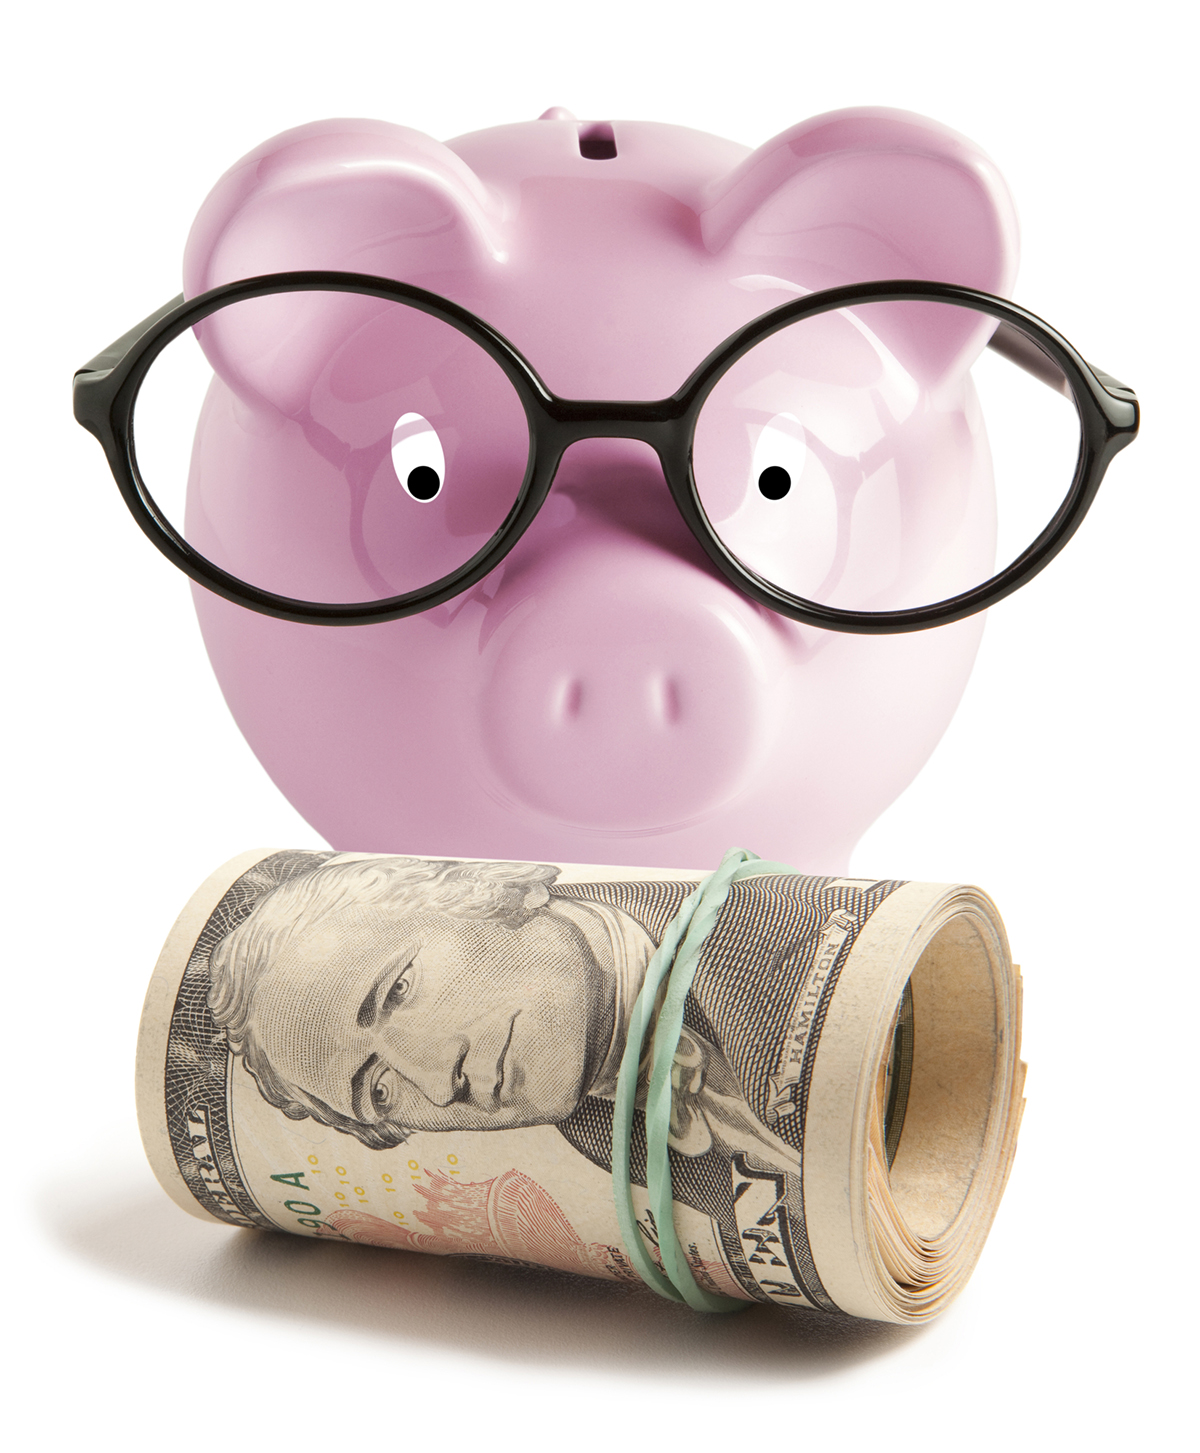 It's surprisingly cost-effective: a pink piggy bank with eyeglasses and funny expression facing rubberband-rolled bills